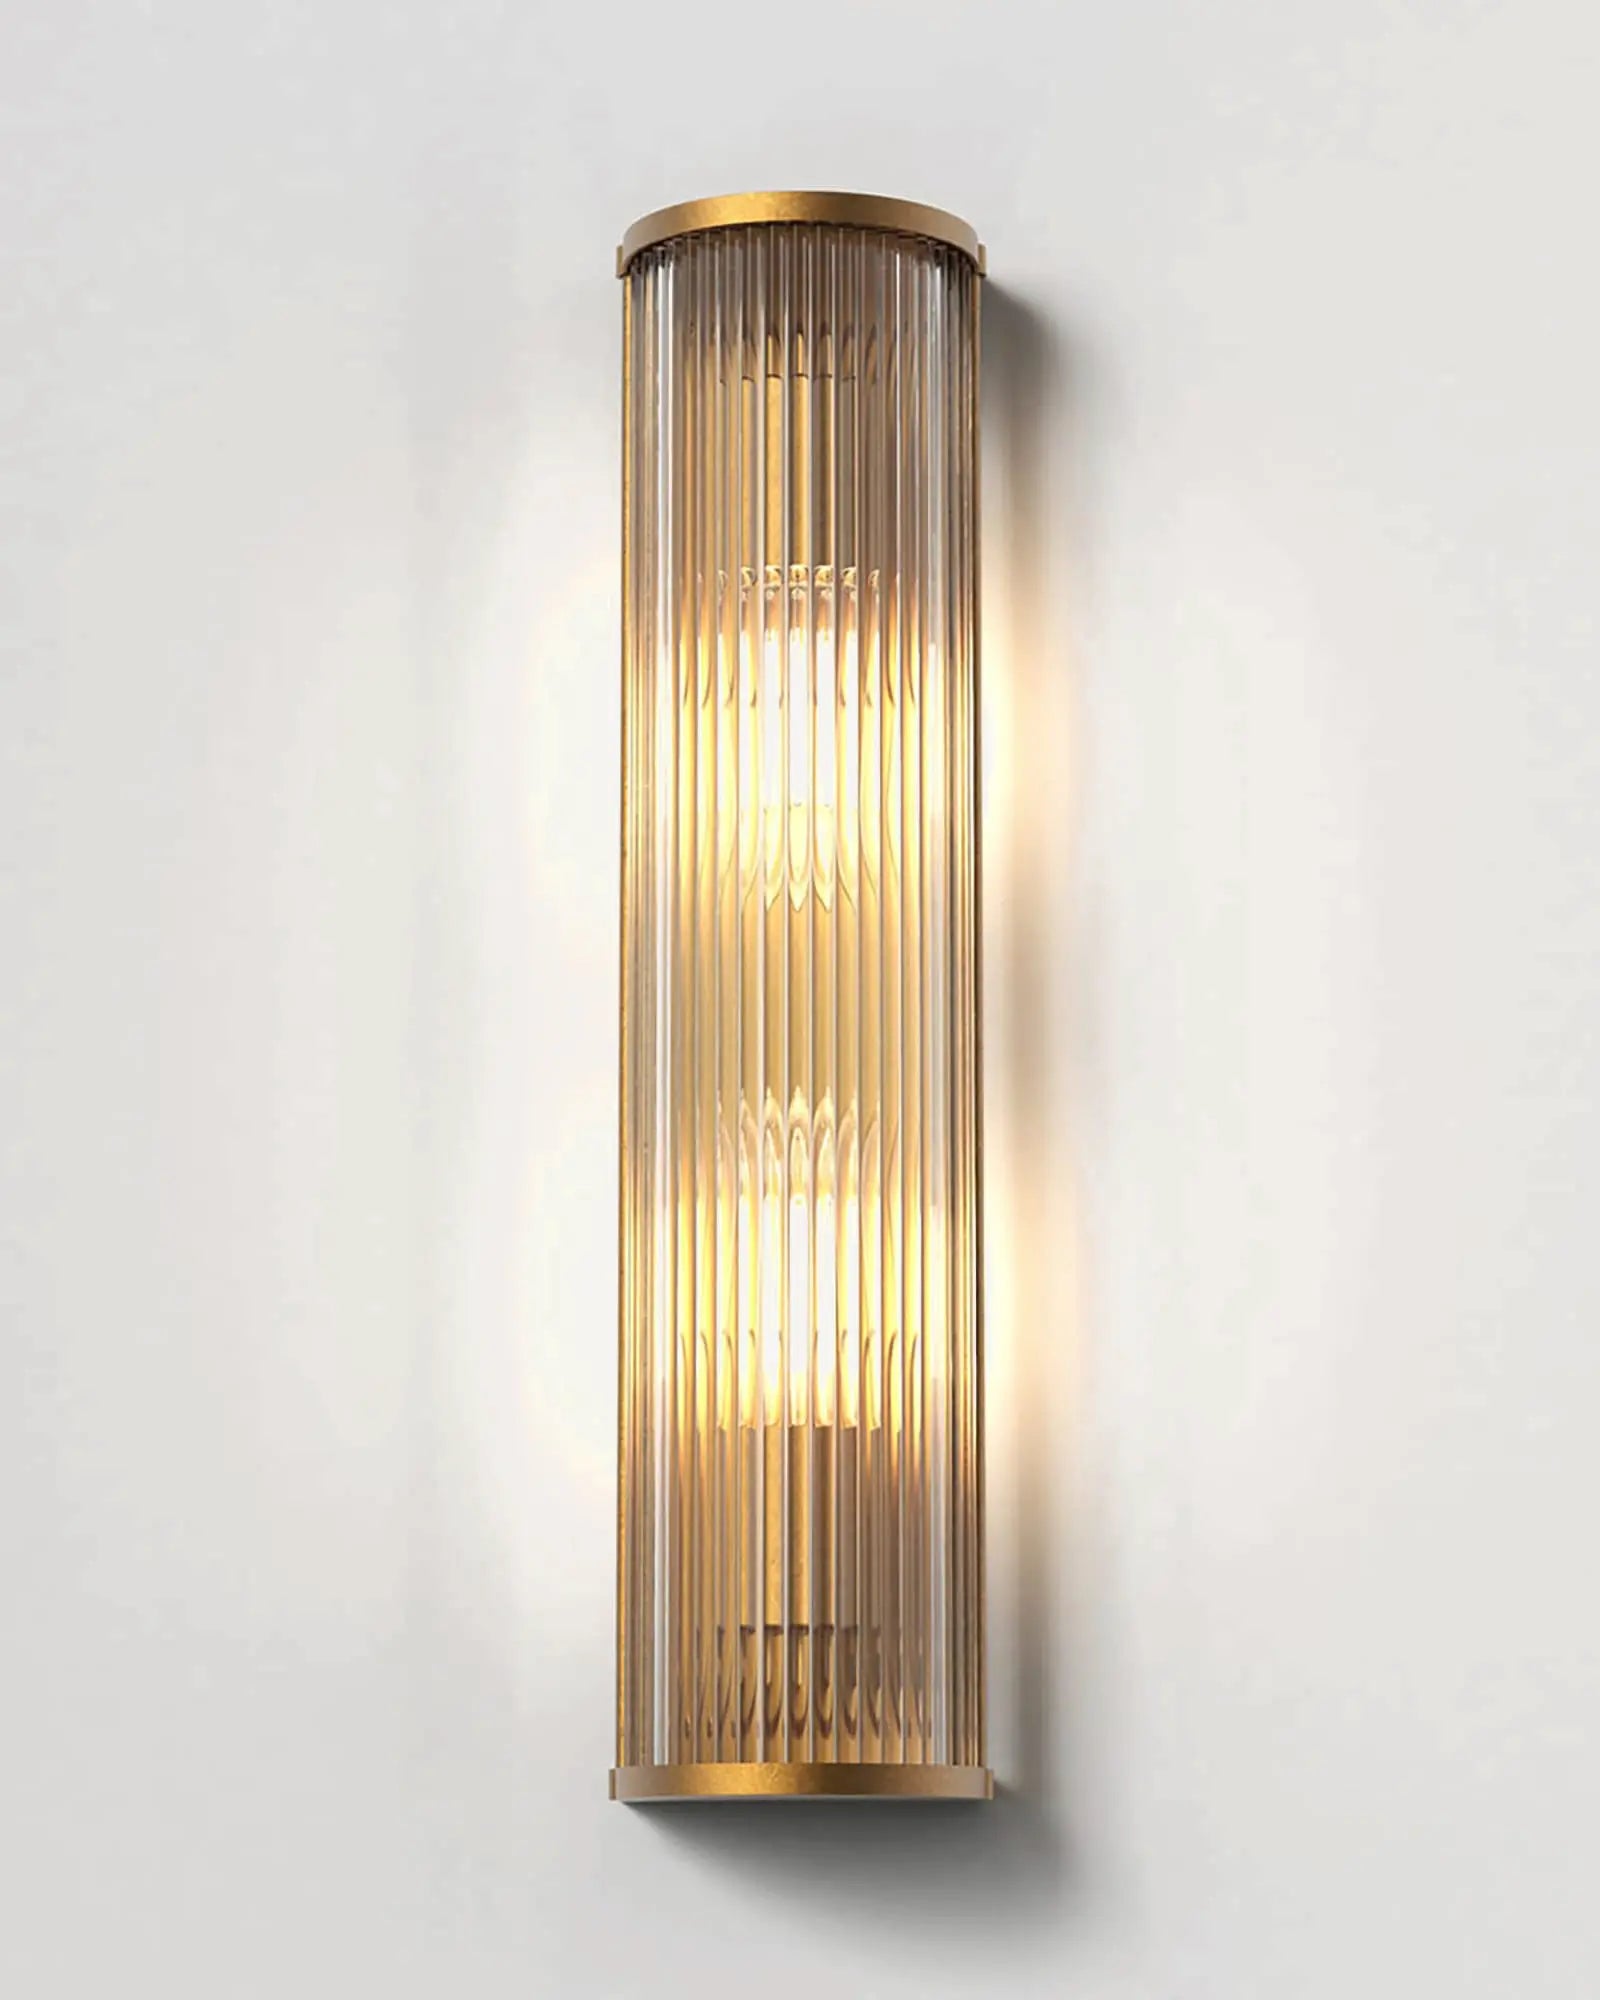 Avignon square wall light in large round brass